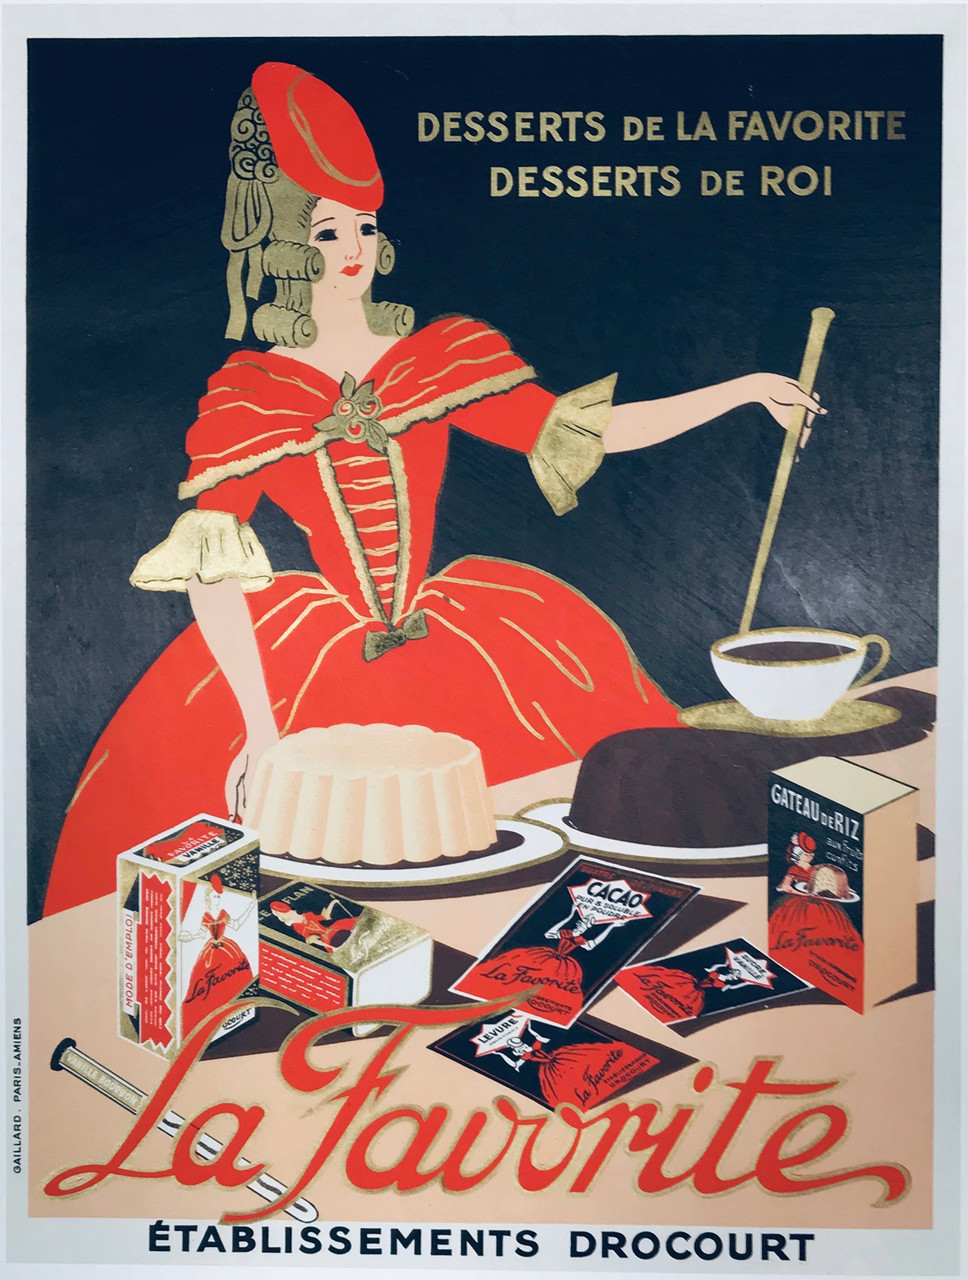 La Favorite original advertising lithography vintage poster from 1930 France. Shows a blond lady wearing a red dress baking a desserts from mixes La Favorite.